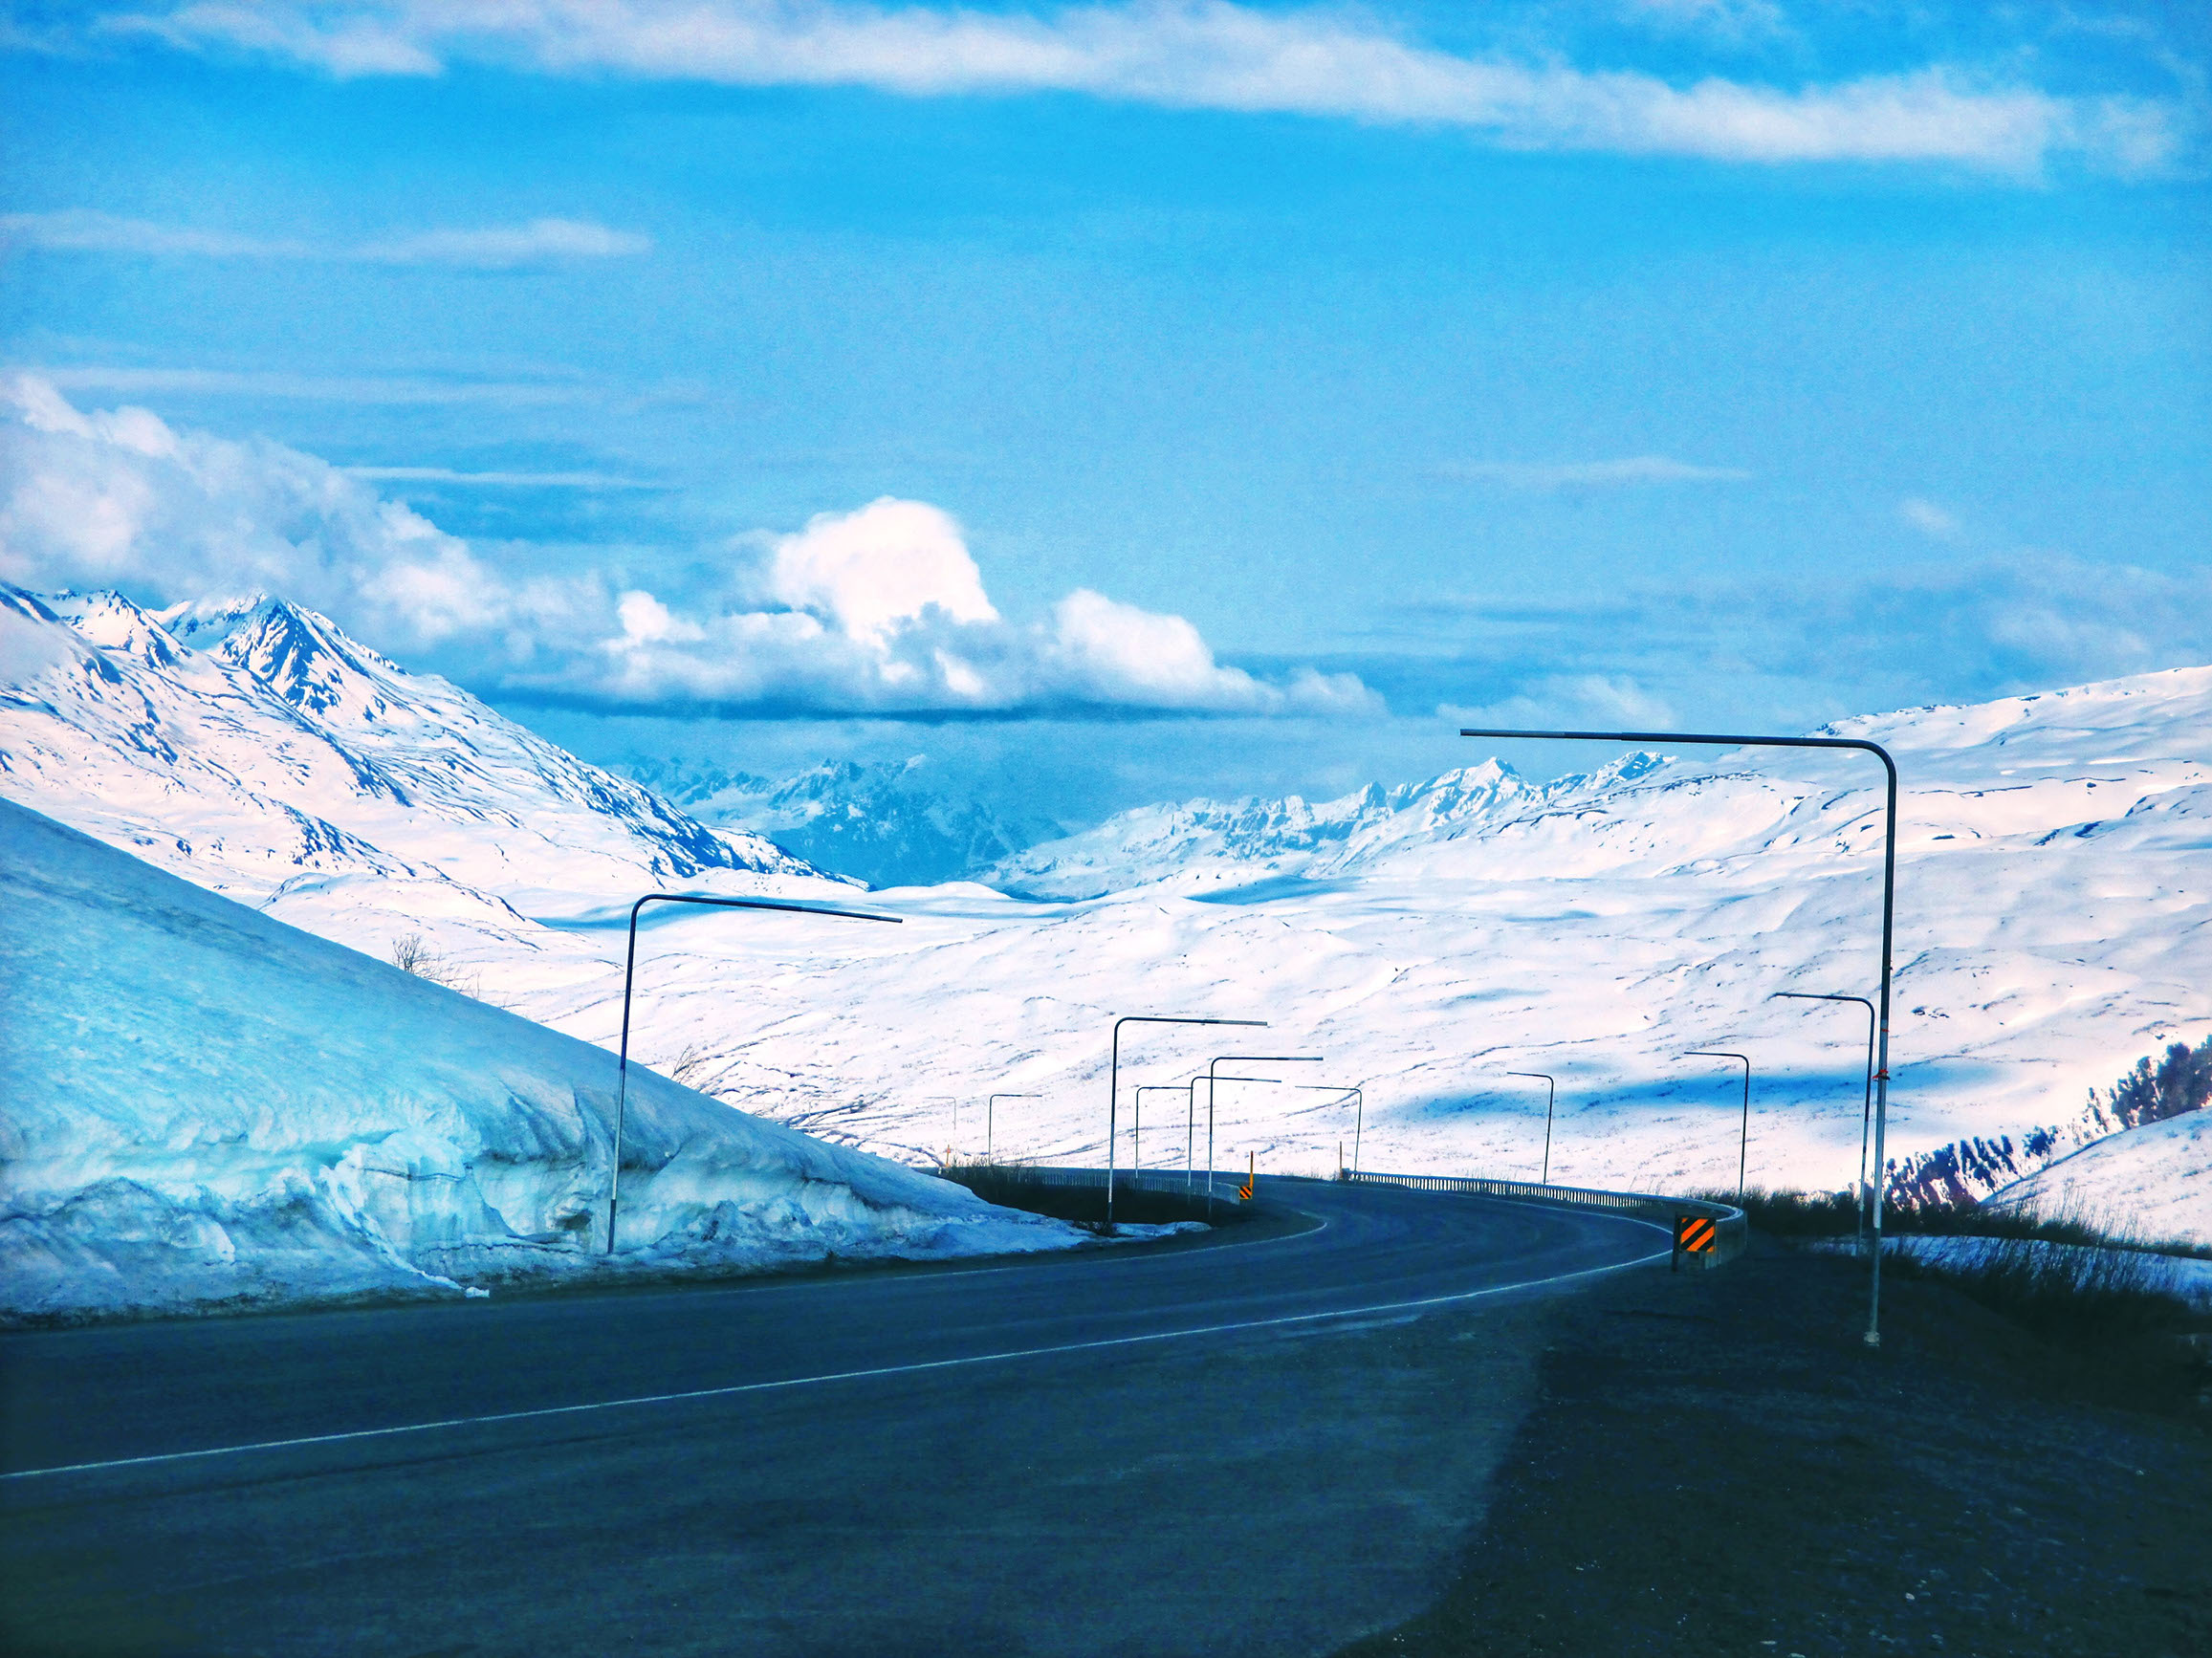 View of Thompson Pass on the way to Valdez in Alaska